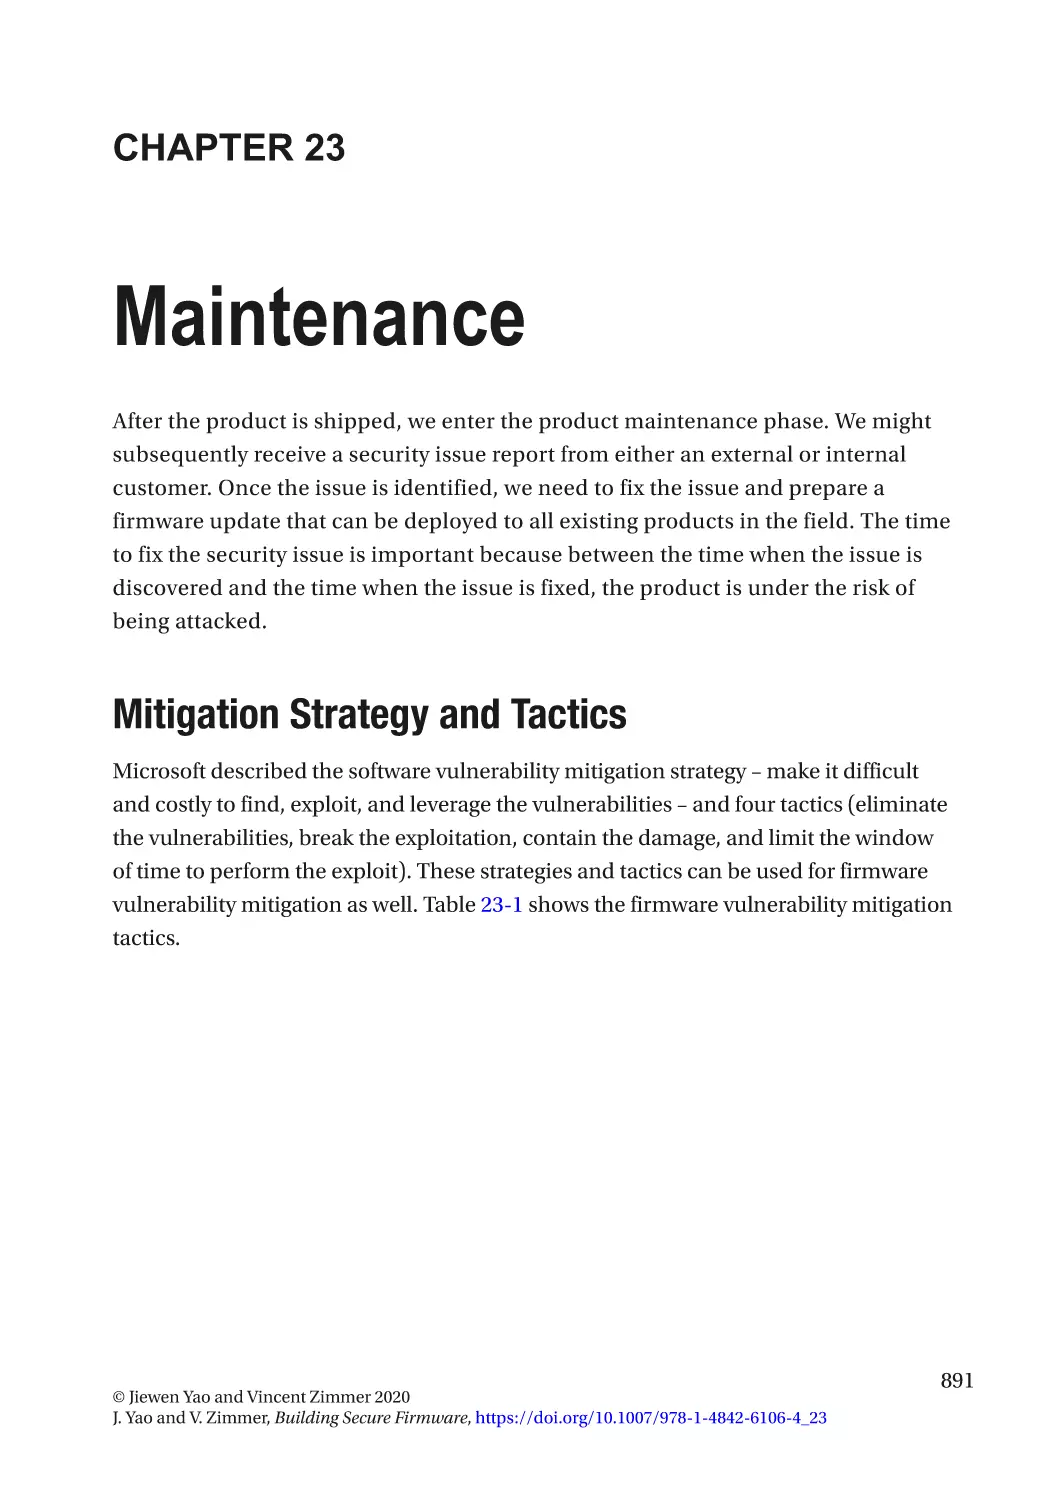 Chapter 23
Mitigation Strategy and Tactics